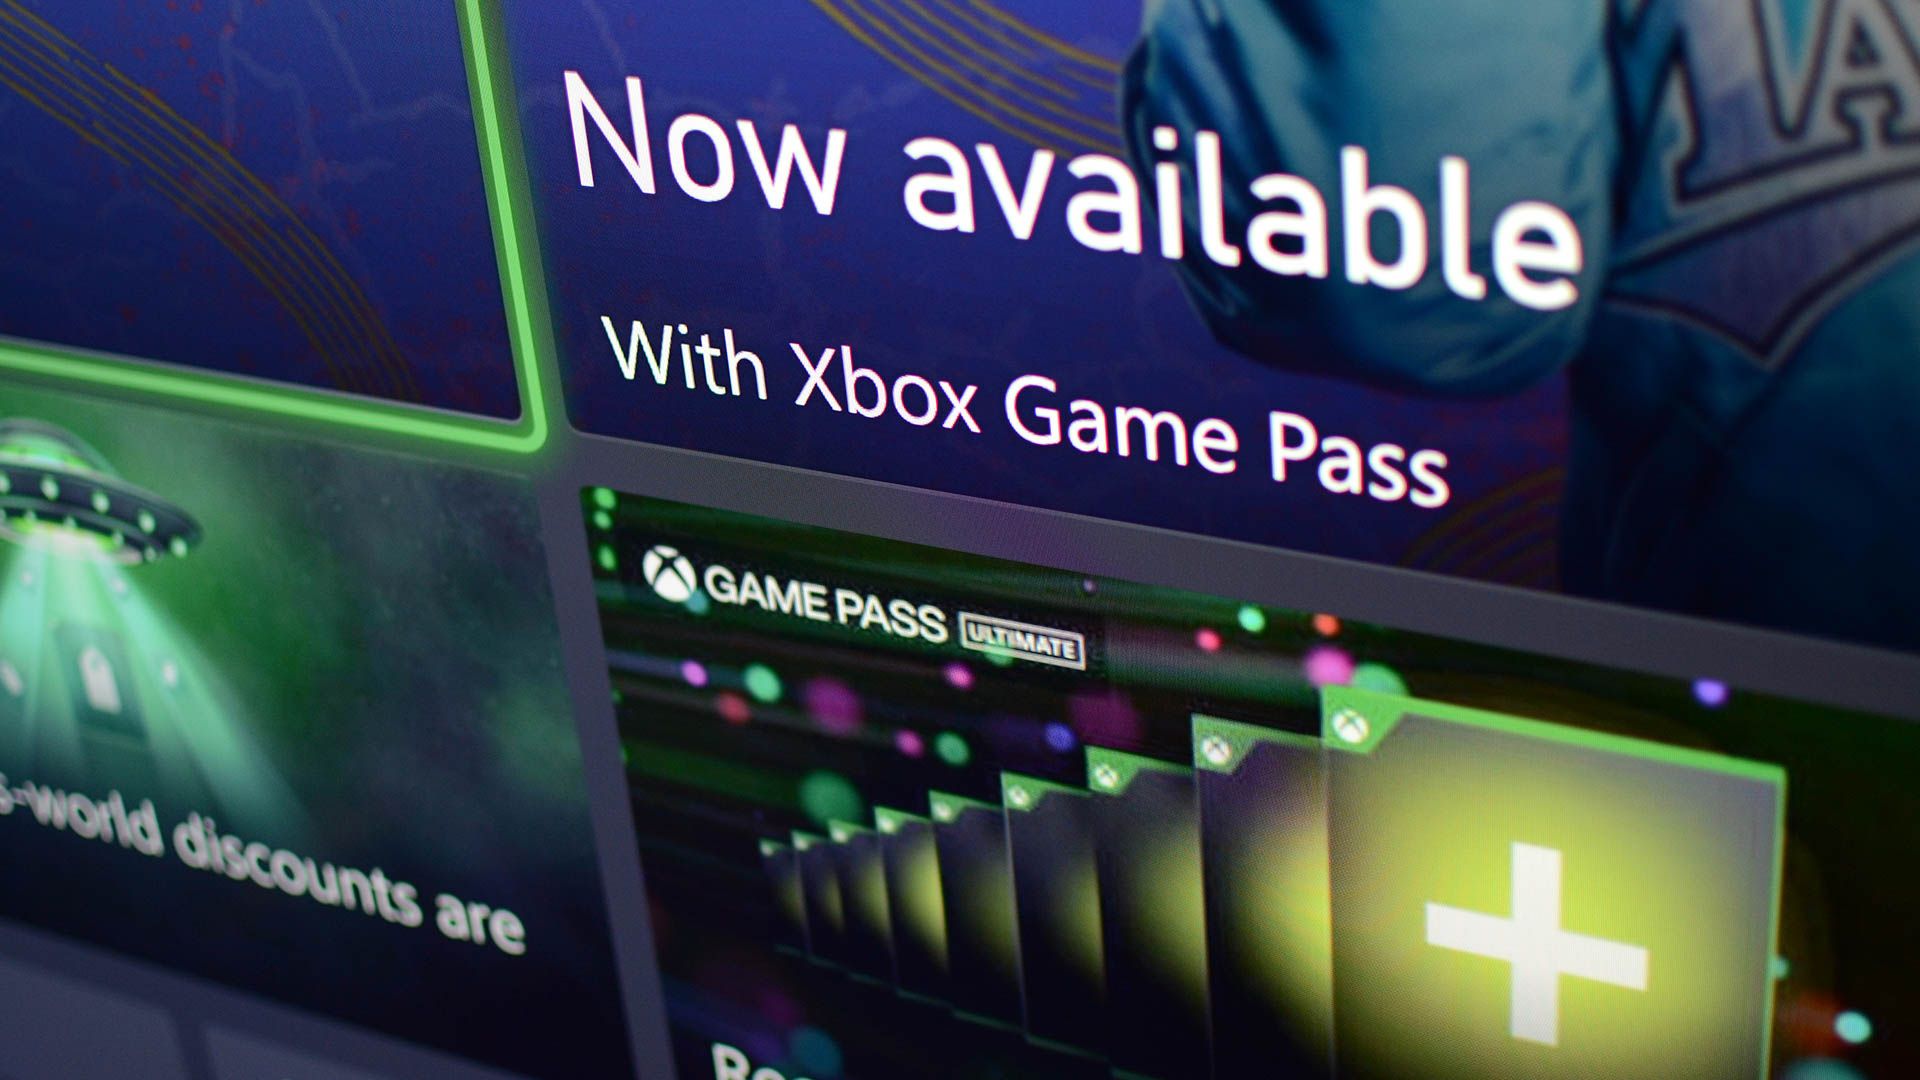 Xbox is getting a smart TV app and streaming stick for cloud gaming